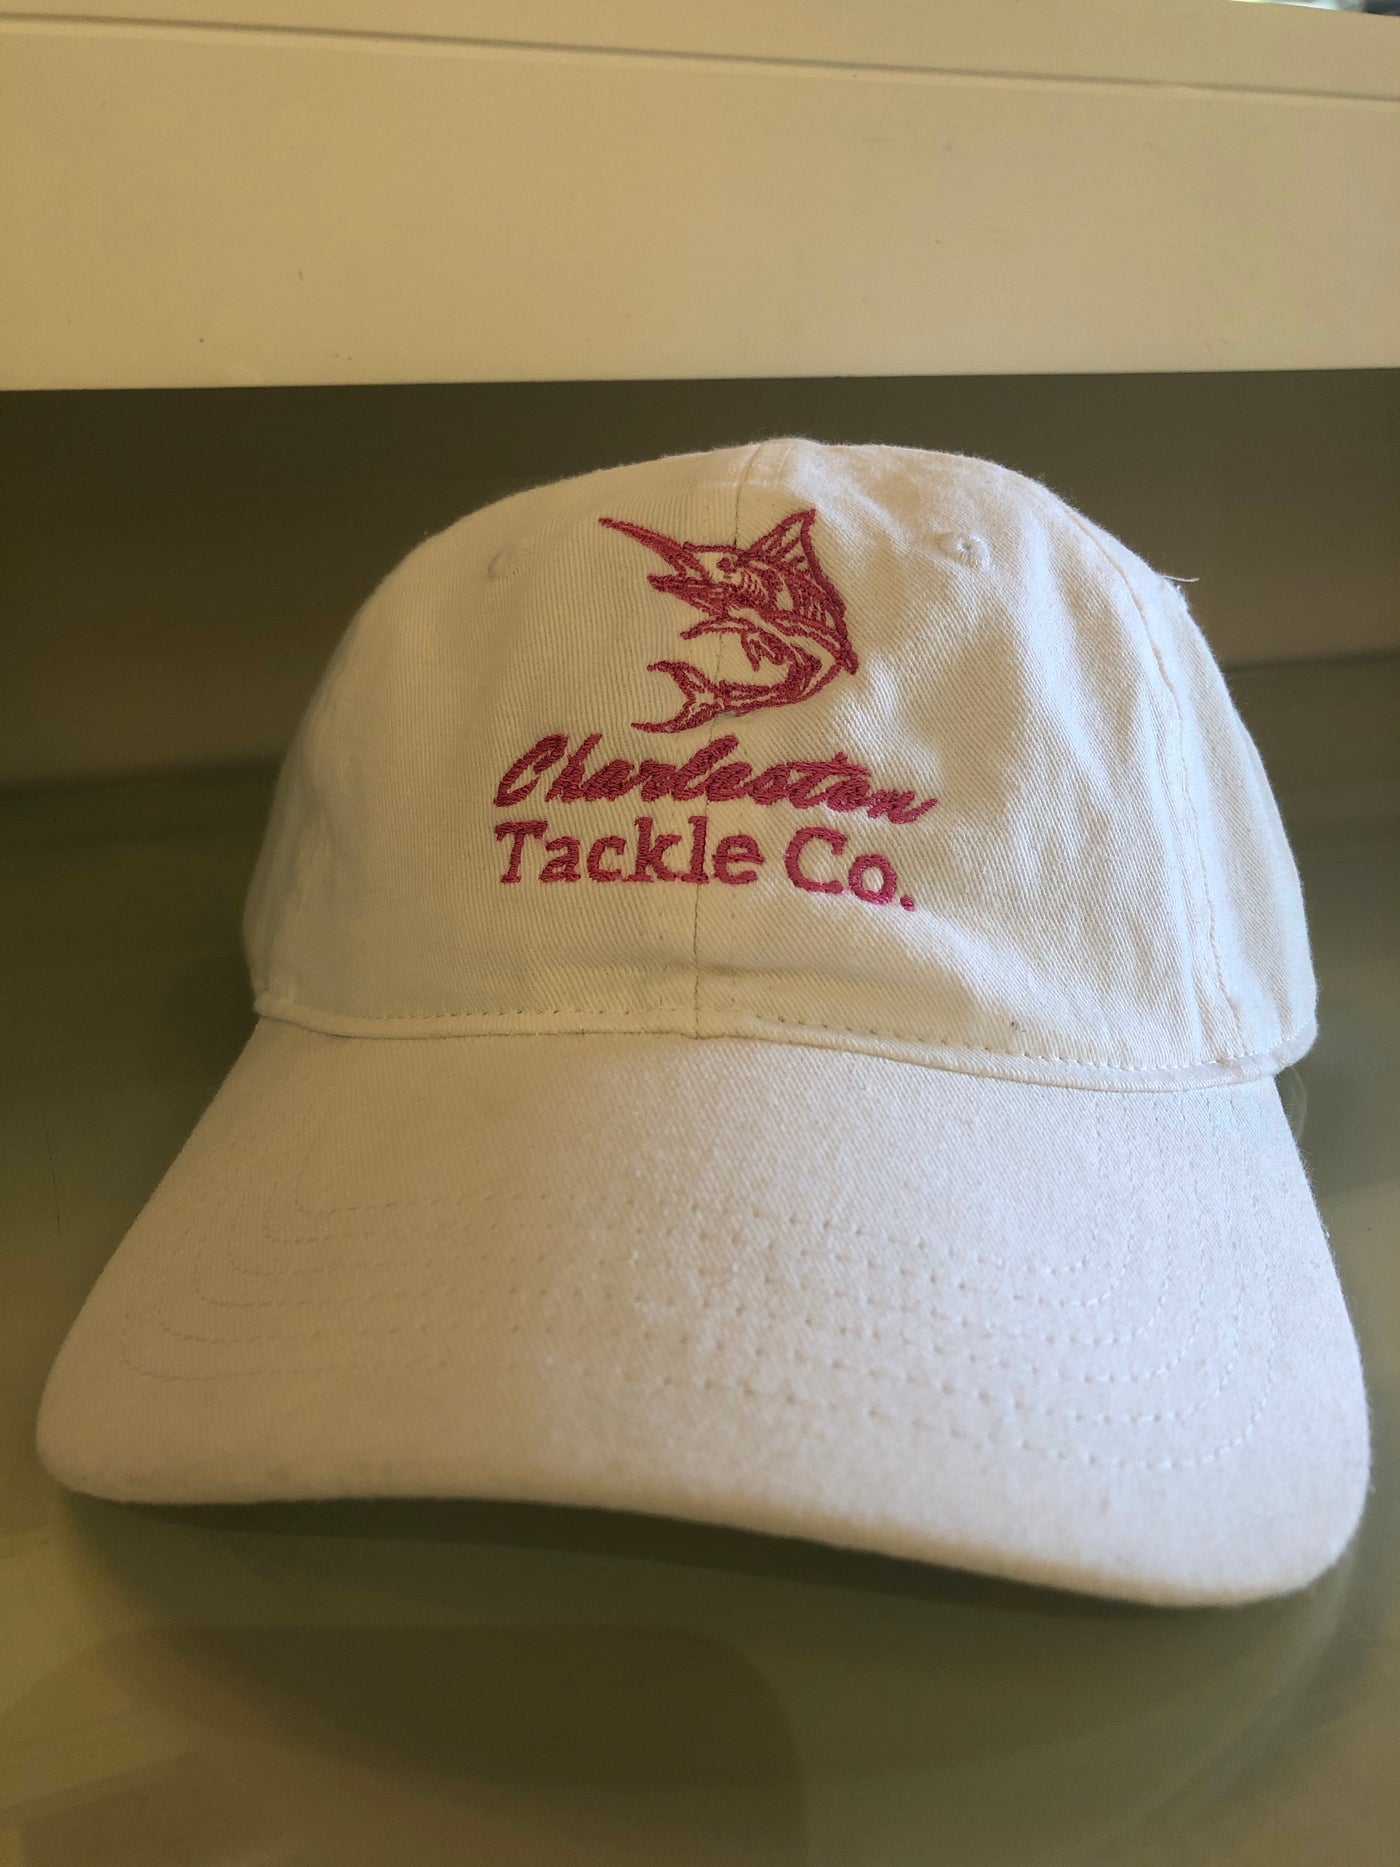 Charleston Tackle Co Logo Baseball Hat- Many colors Adult and Youth Sizes